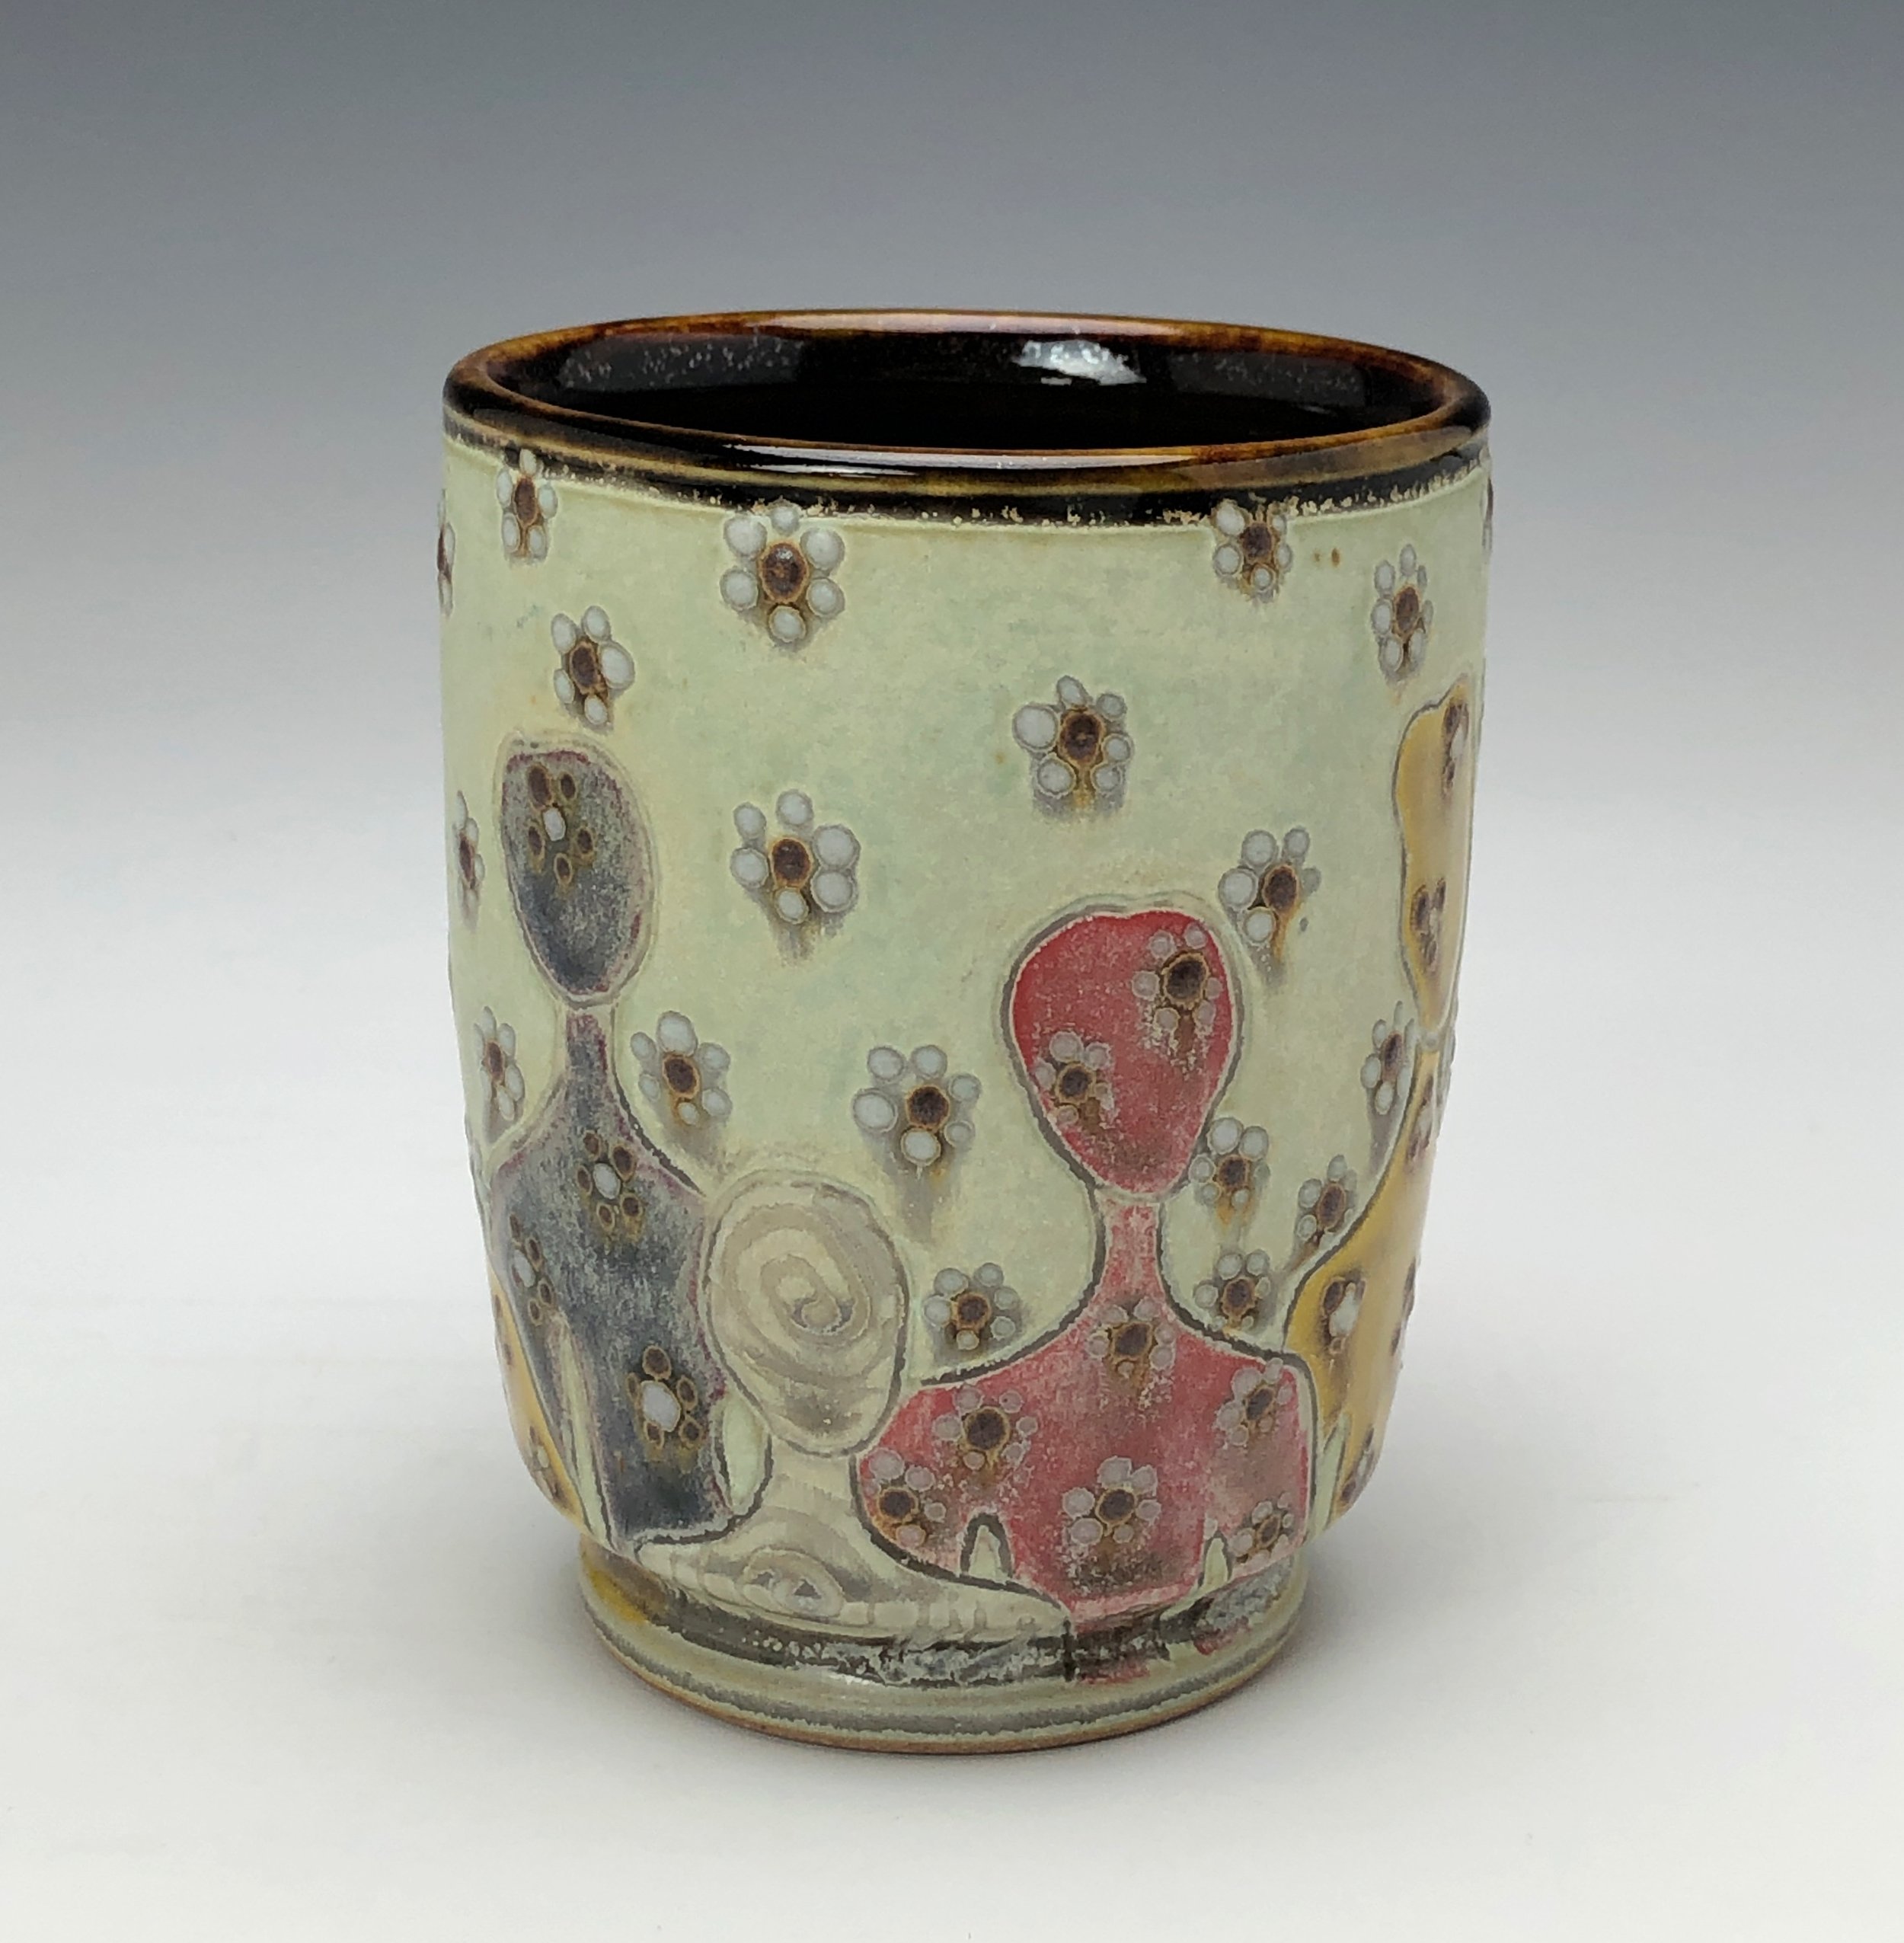  Samantha Henneke, Bulldog Pottery, Seagrove, North Carolina  Yunomi 6- Casual drinking cup made from a smooth white porcelaneous clay body. Figurative decoration with slip and glaze dot patterns. Translucent vellum glaze over various underglaze colo